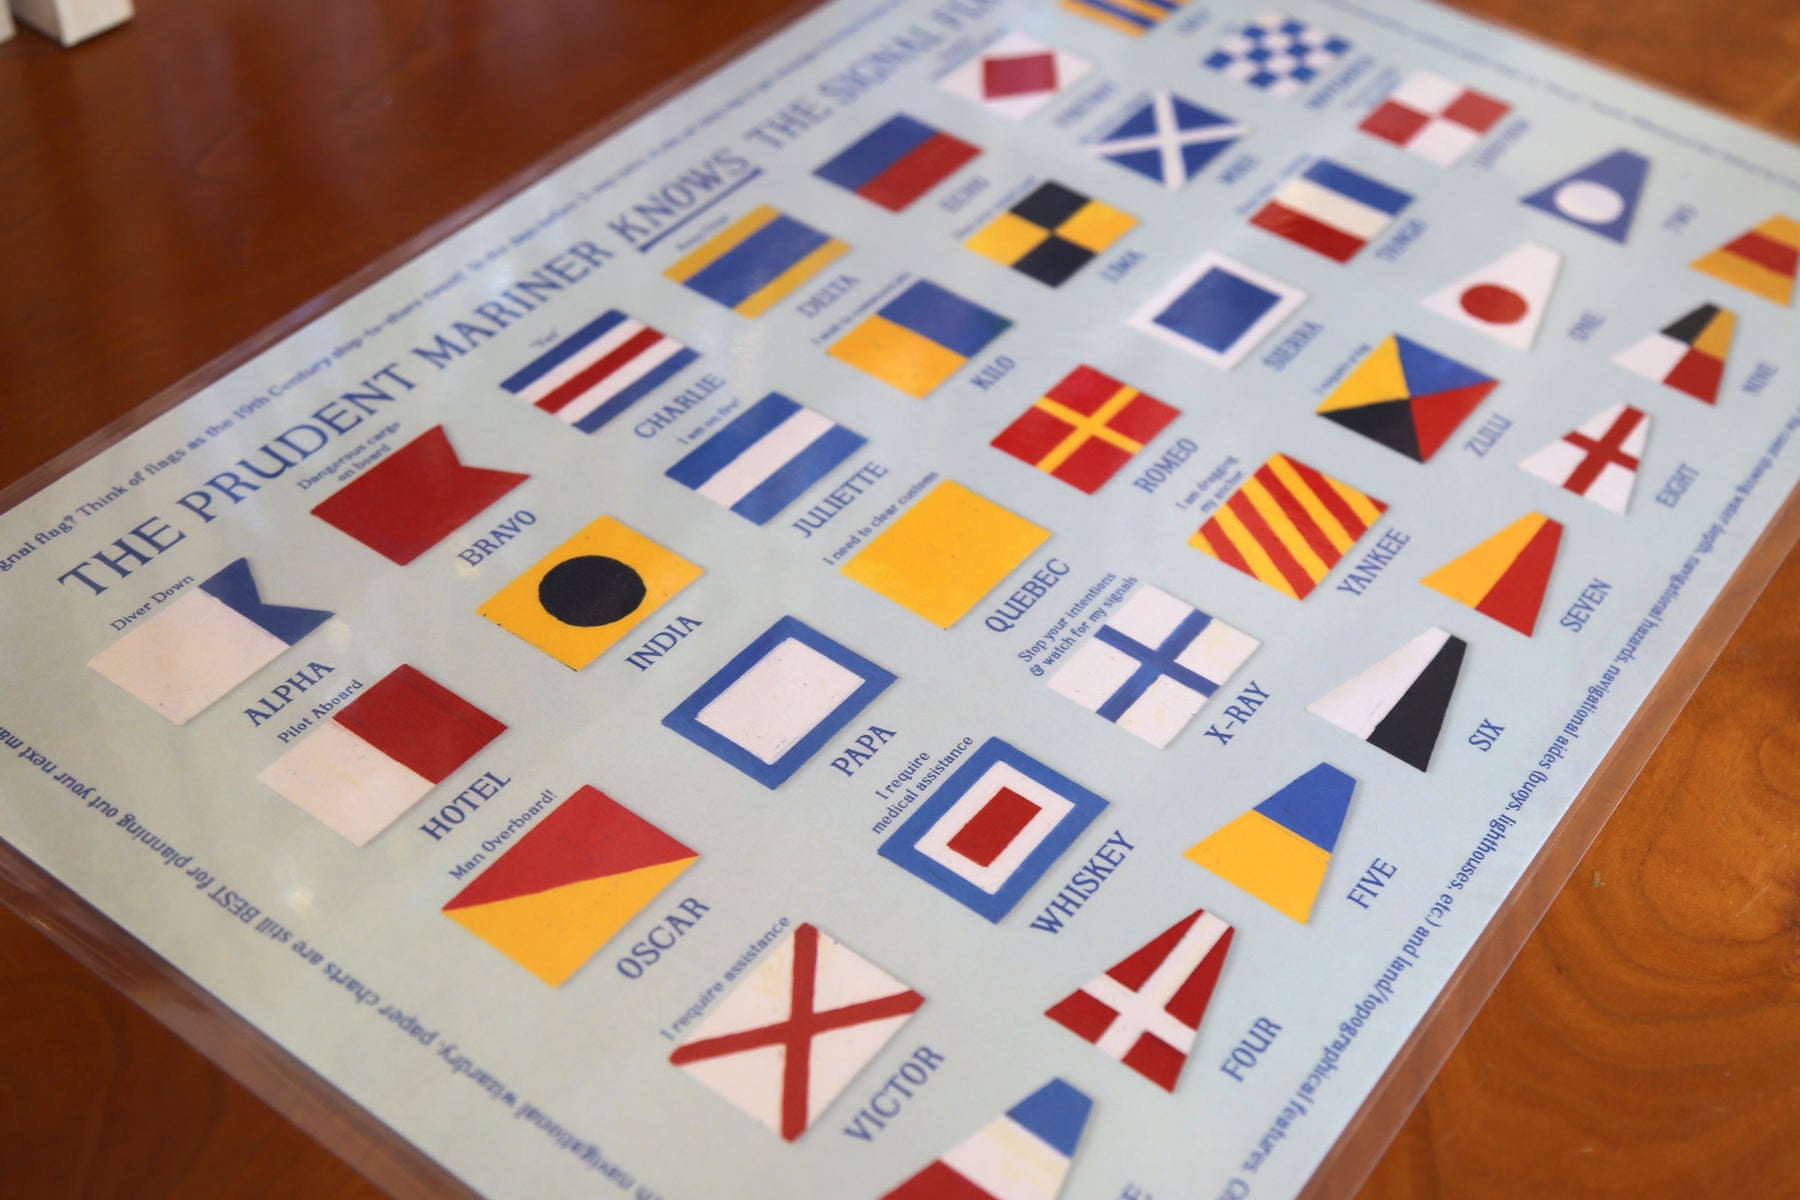 Download this JPG on signal flags and their meanings.